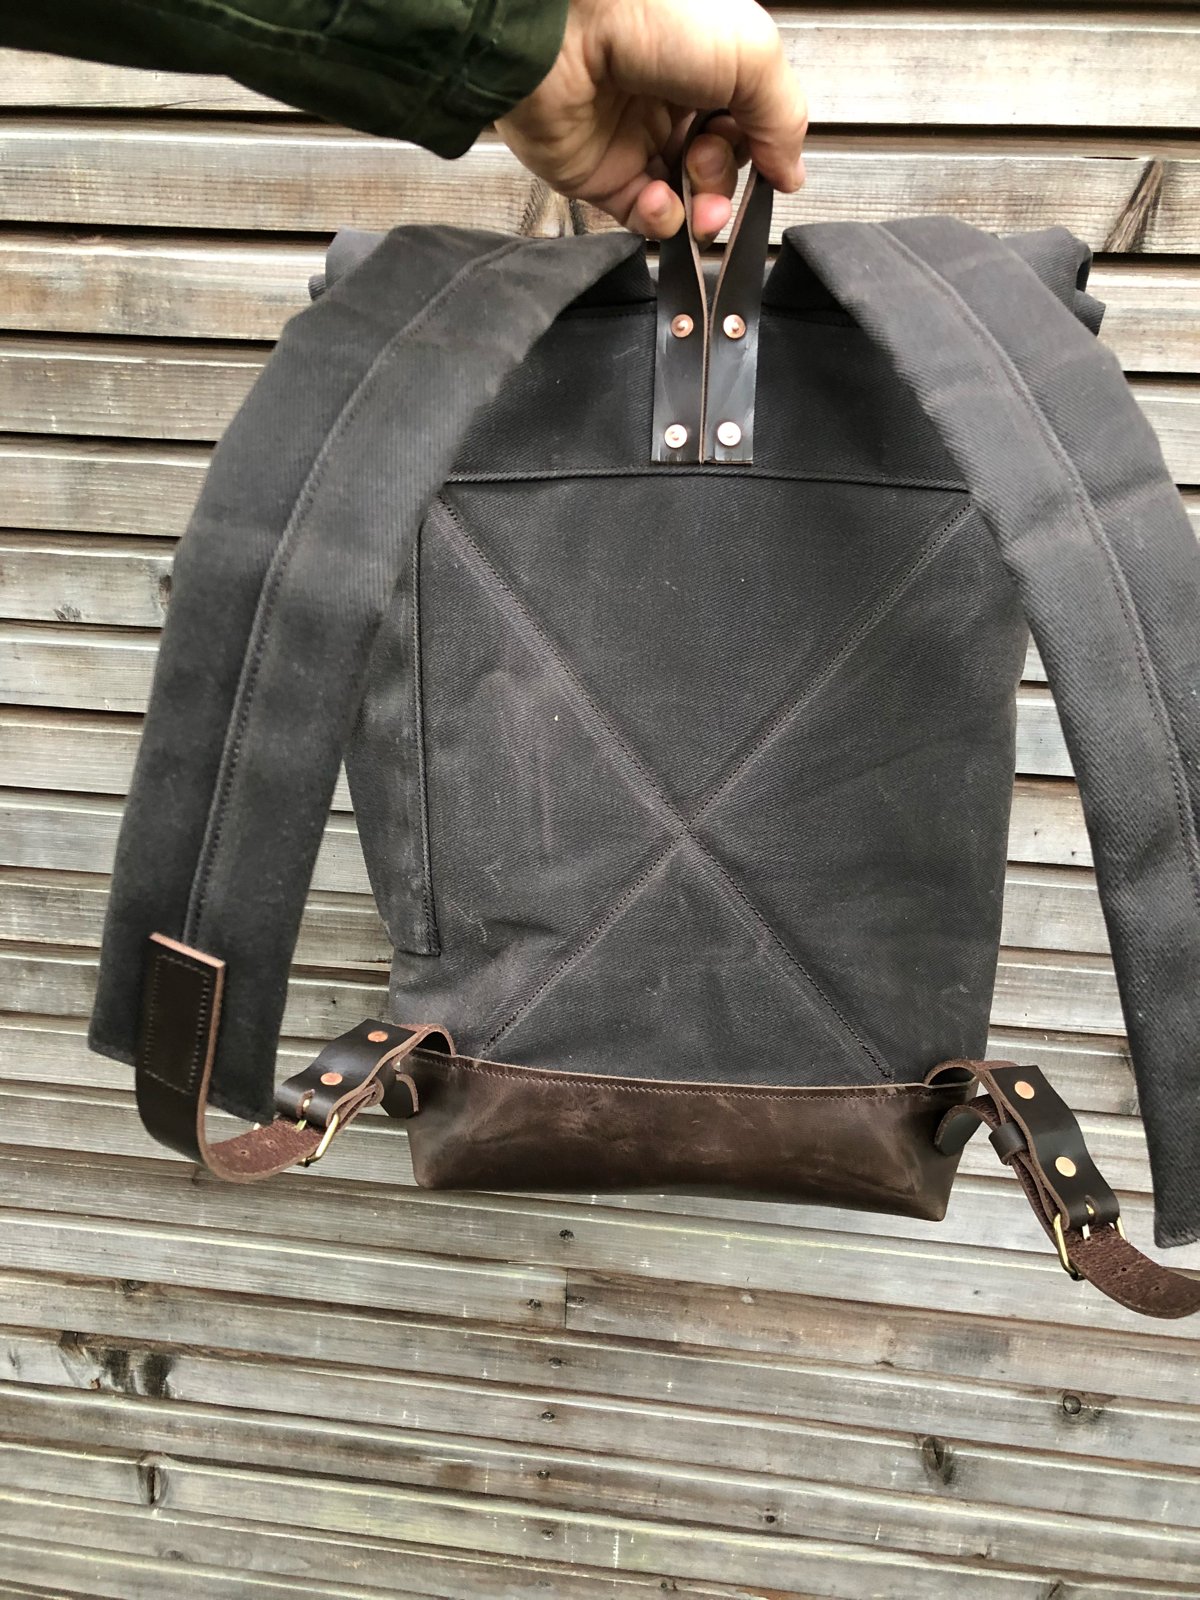 Image of Waxed canvas leather Backpack medium size / Hipster Backpack with roll up top and leather bottom